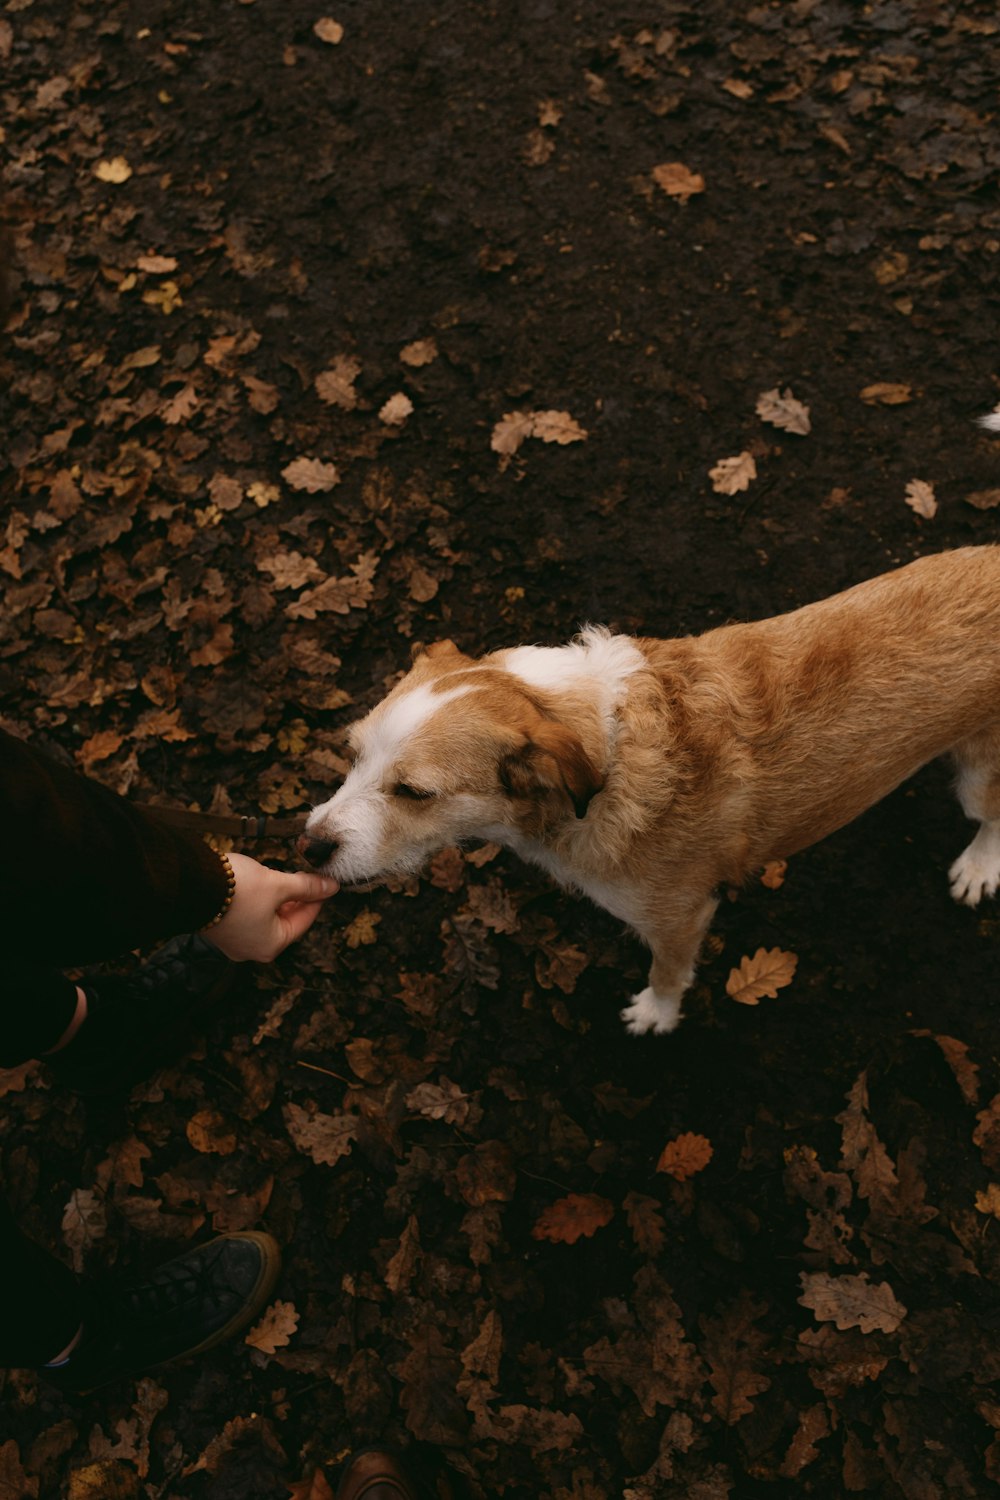 a brown and white dog standing next to a person